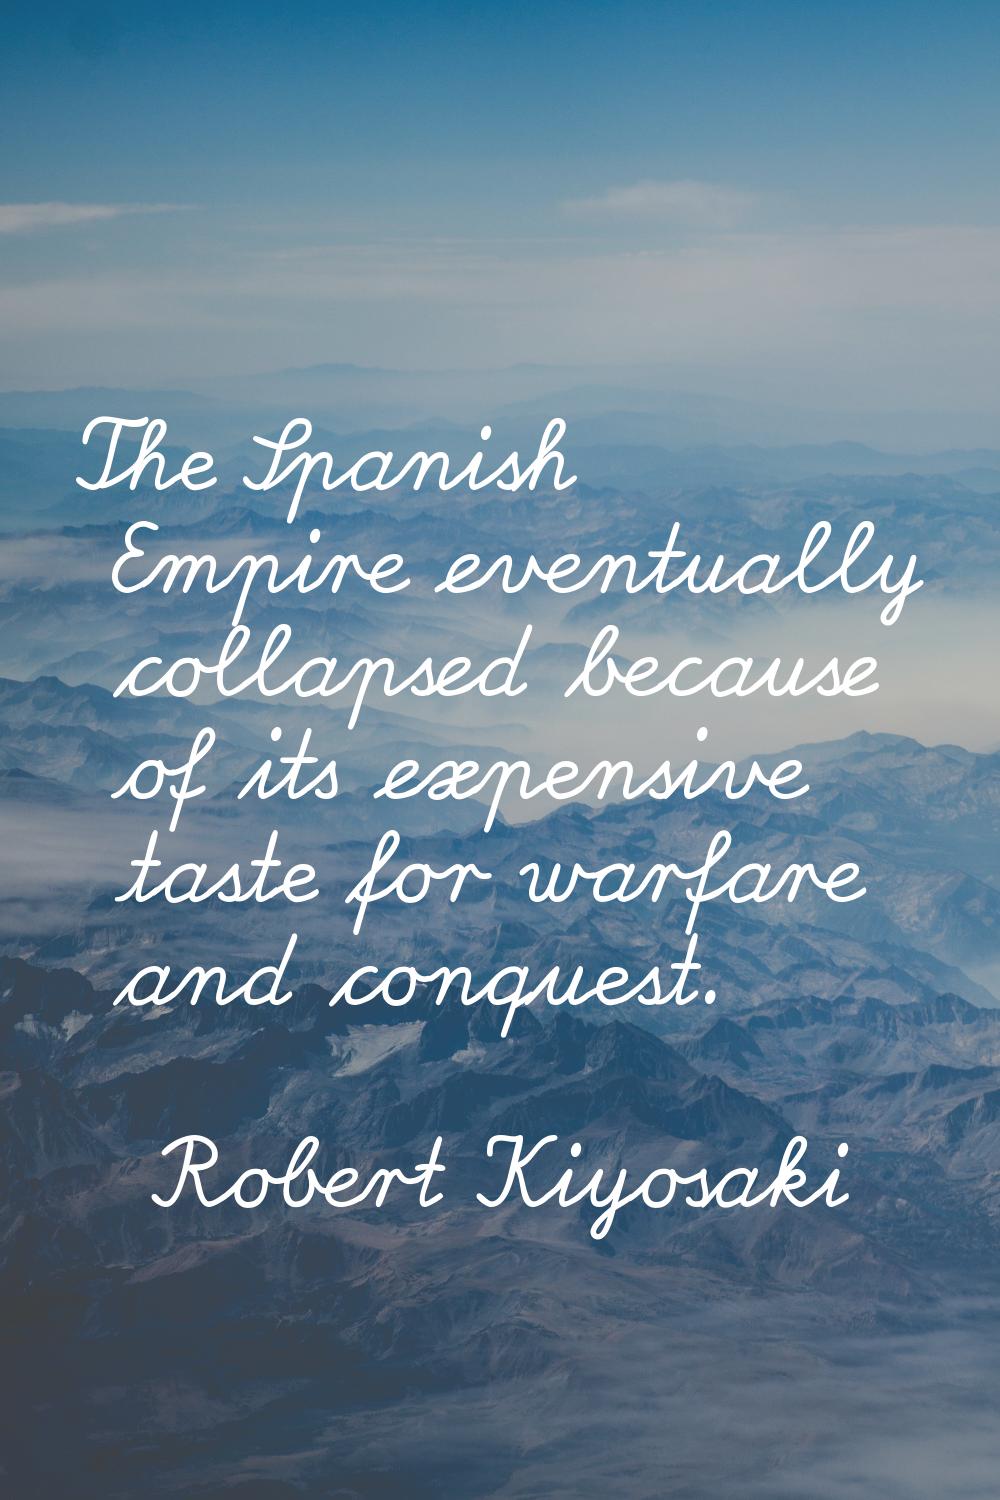 The Spanish Empire eventually collapsed because of its expensive taste for warfare and conquest.